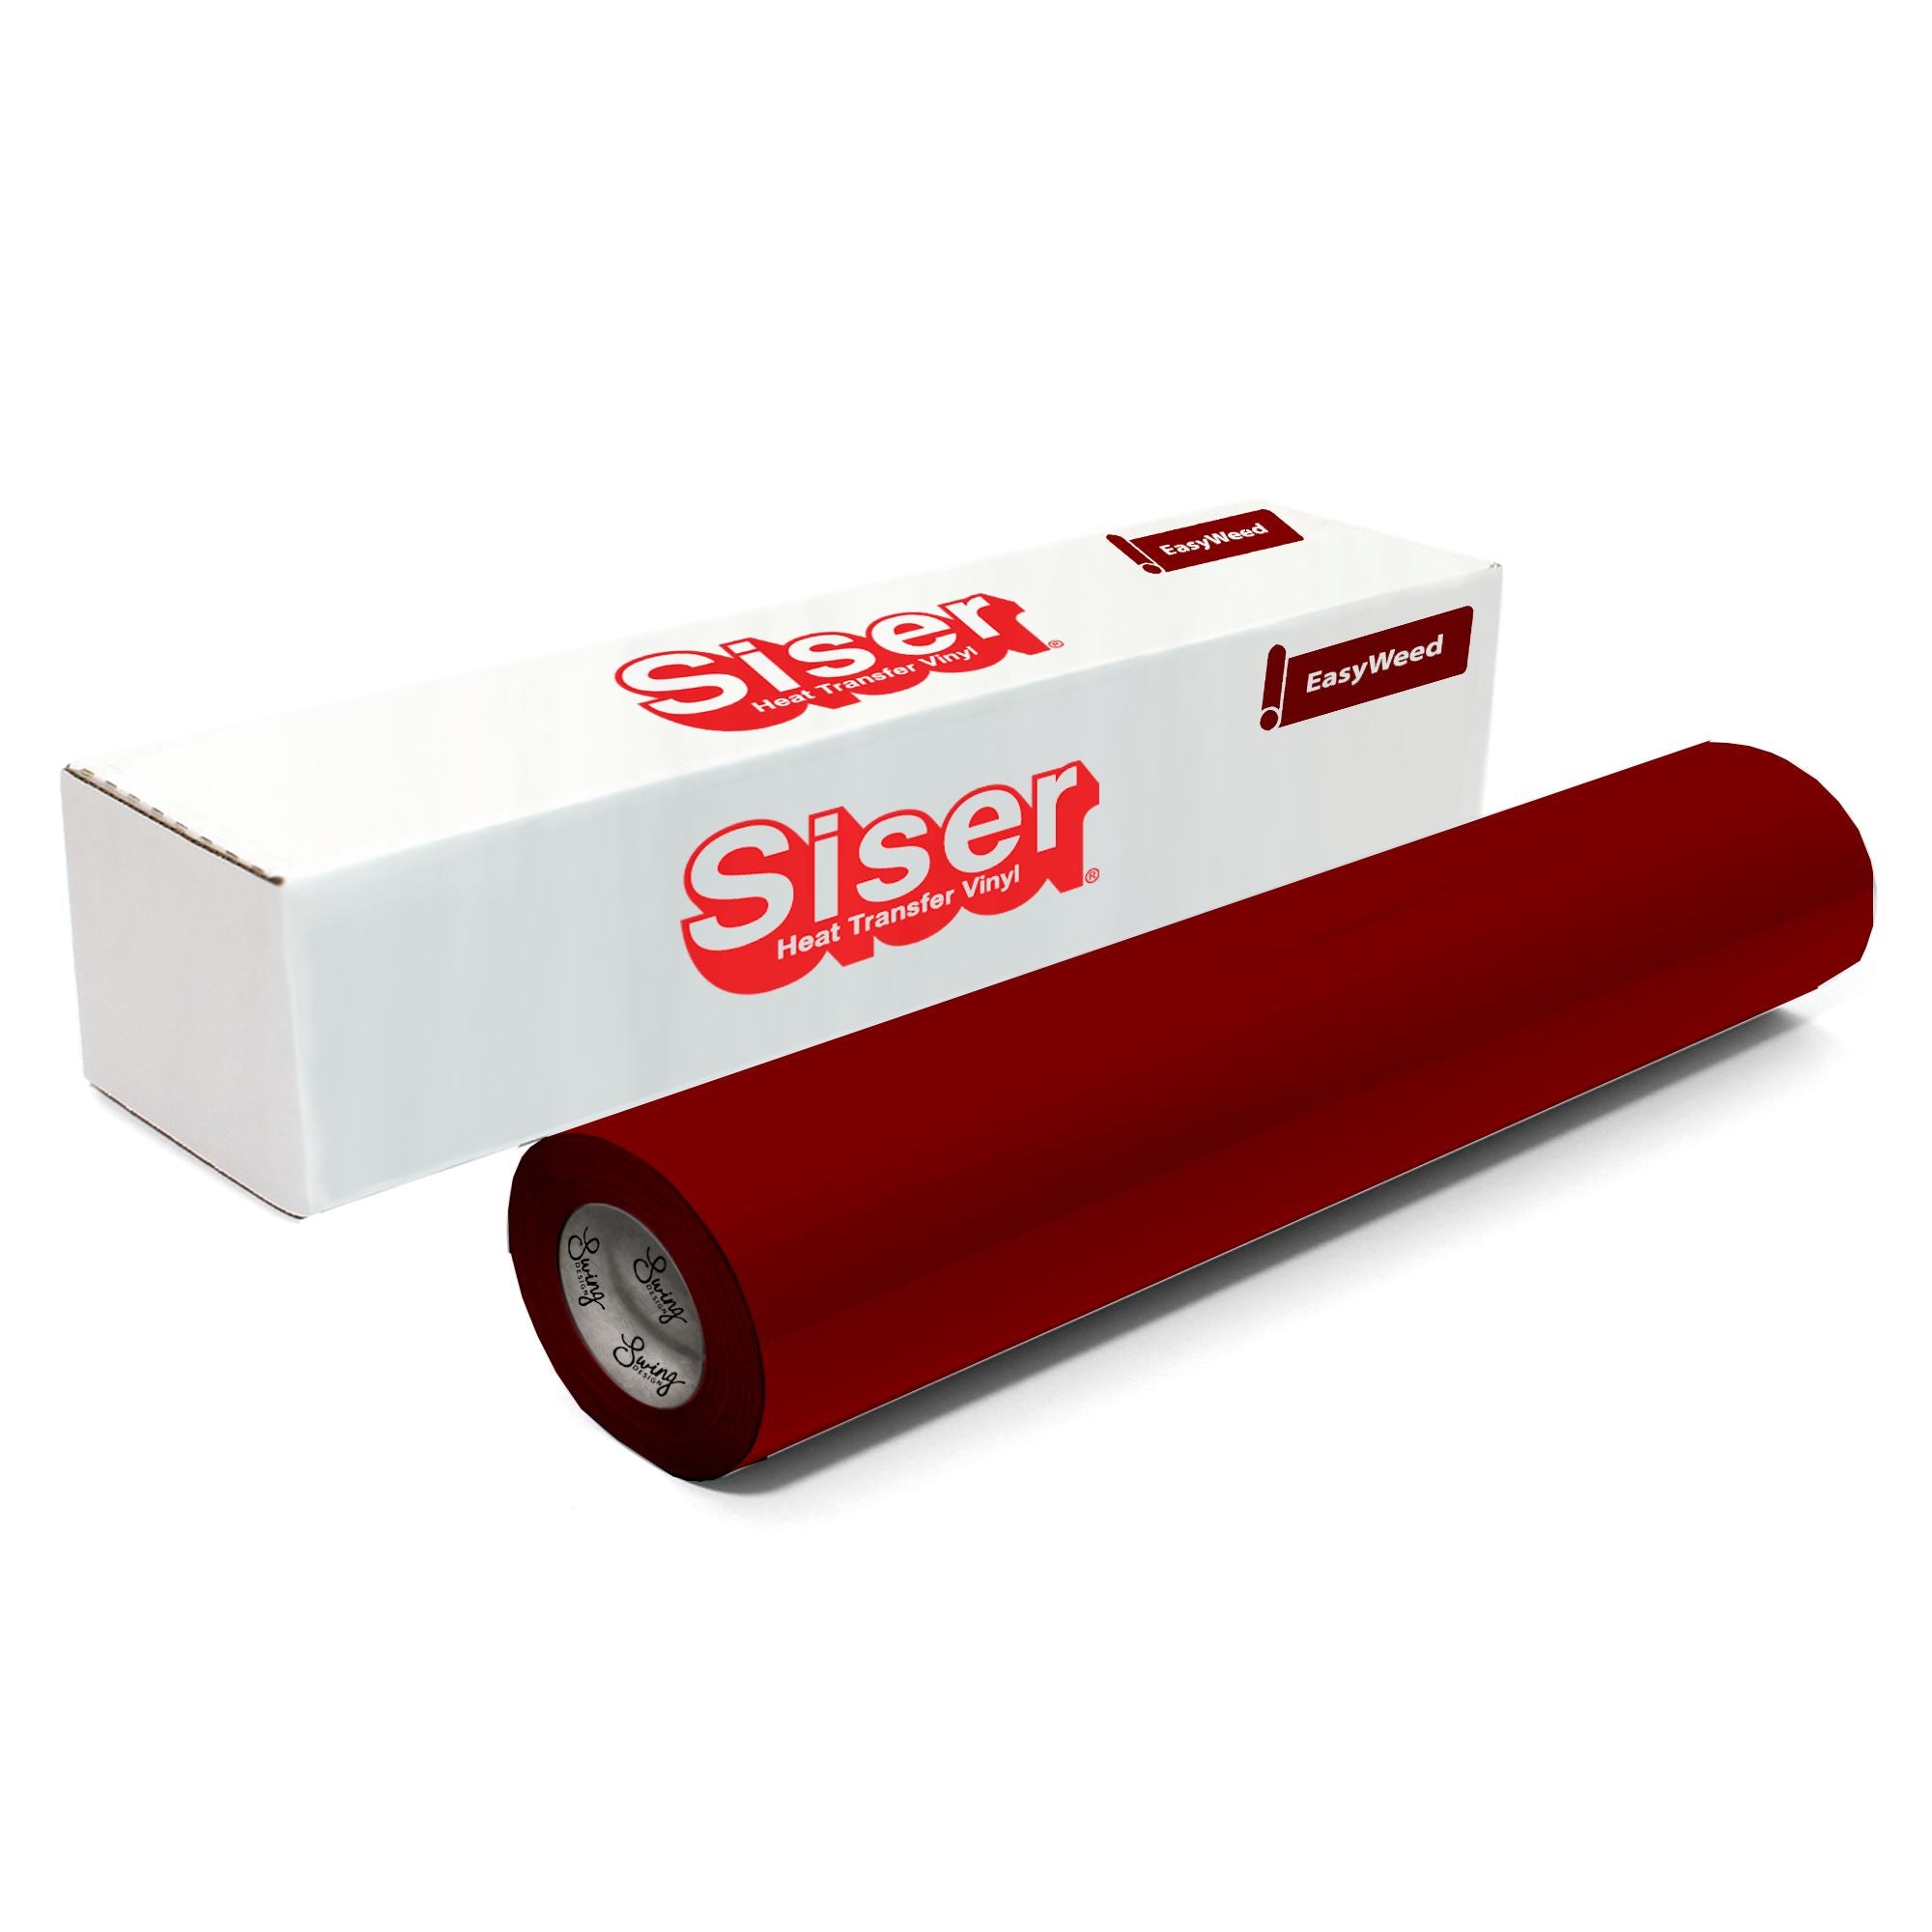 Siser EasyWeed Heat Transfer Material 12 x 150 ft Roll - 48 Colors Available, Silver